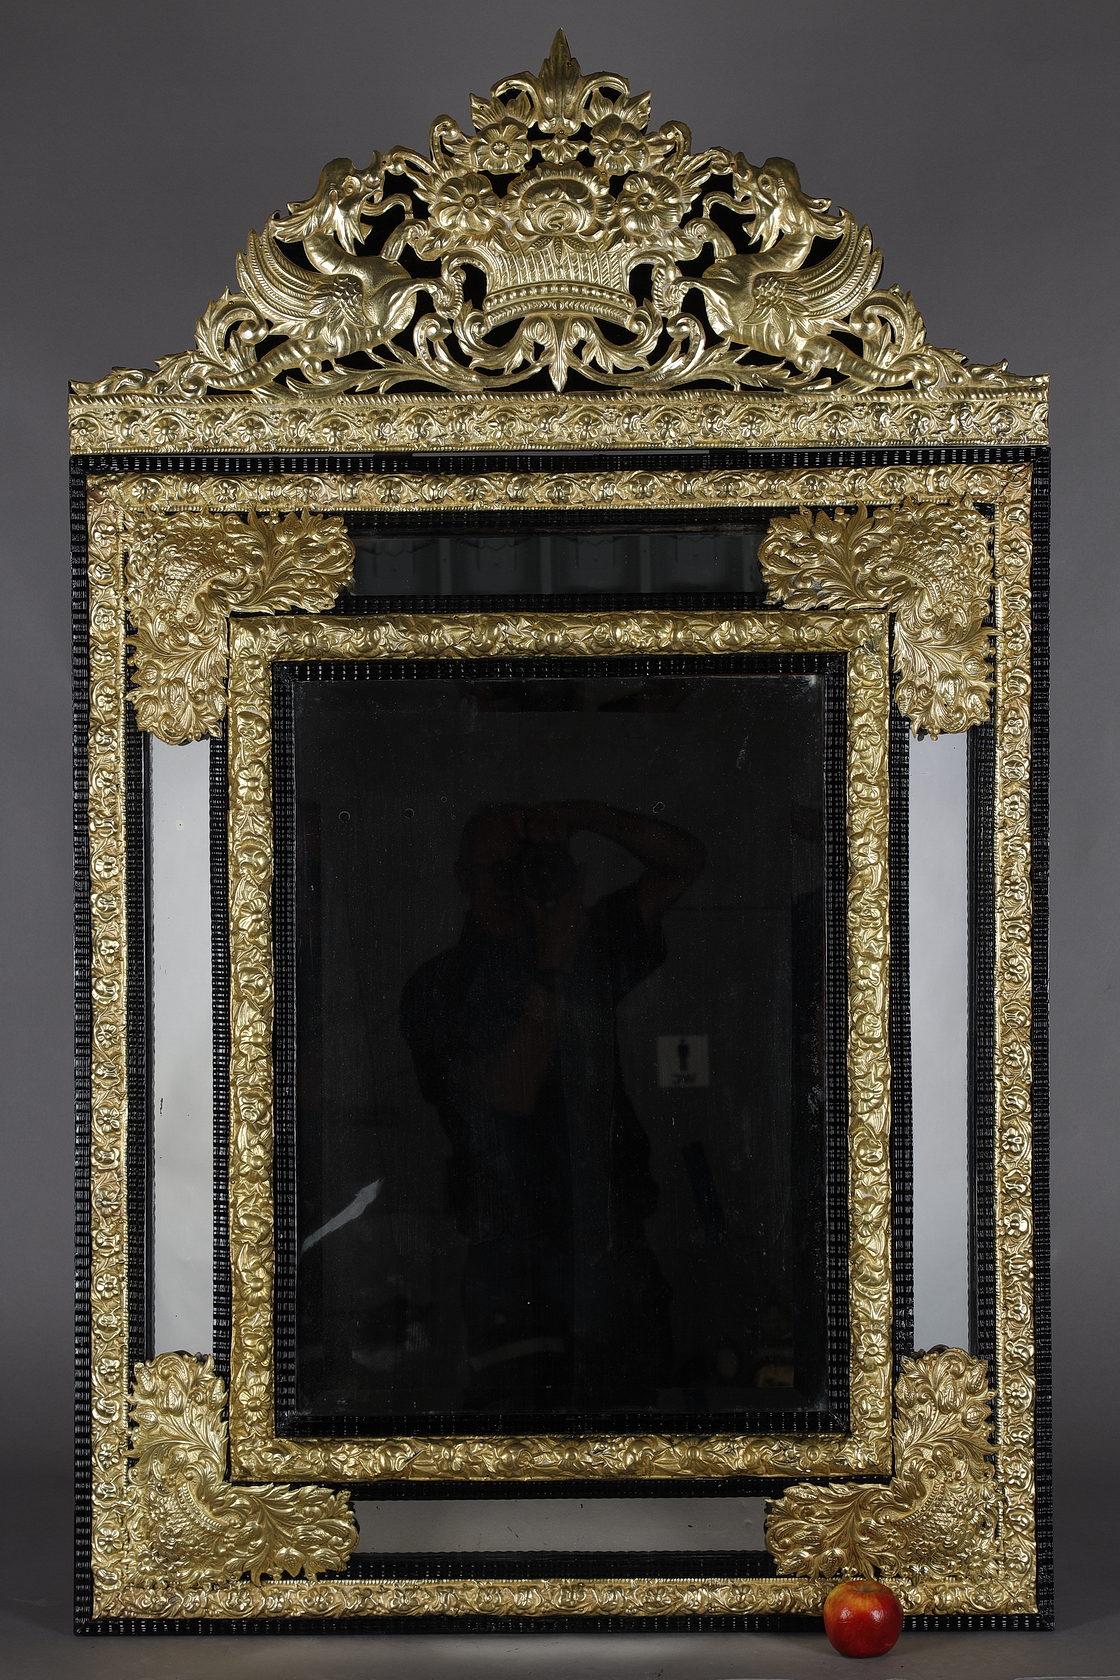 Large Louis XIV style mirror with mirror bars in blackened wood and rich gilded and embossed copper decoration. The pediment is adorned with a motif of a basket of overflowing flowers surrounded by two winged chimeras with open mouths. The central